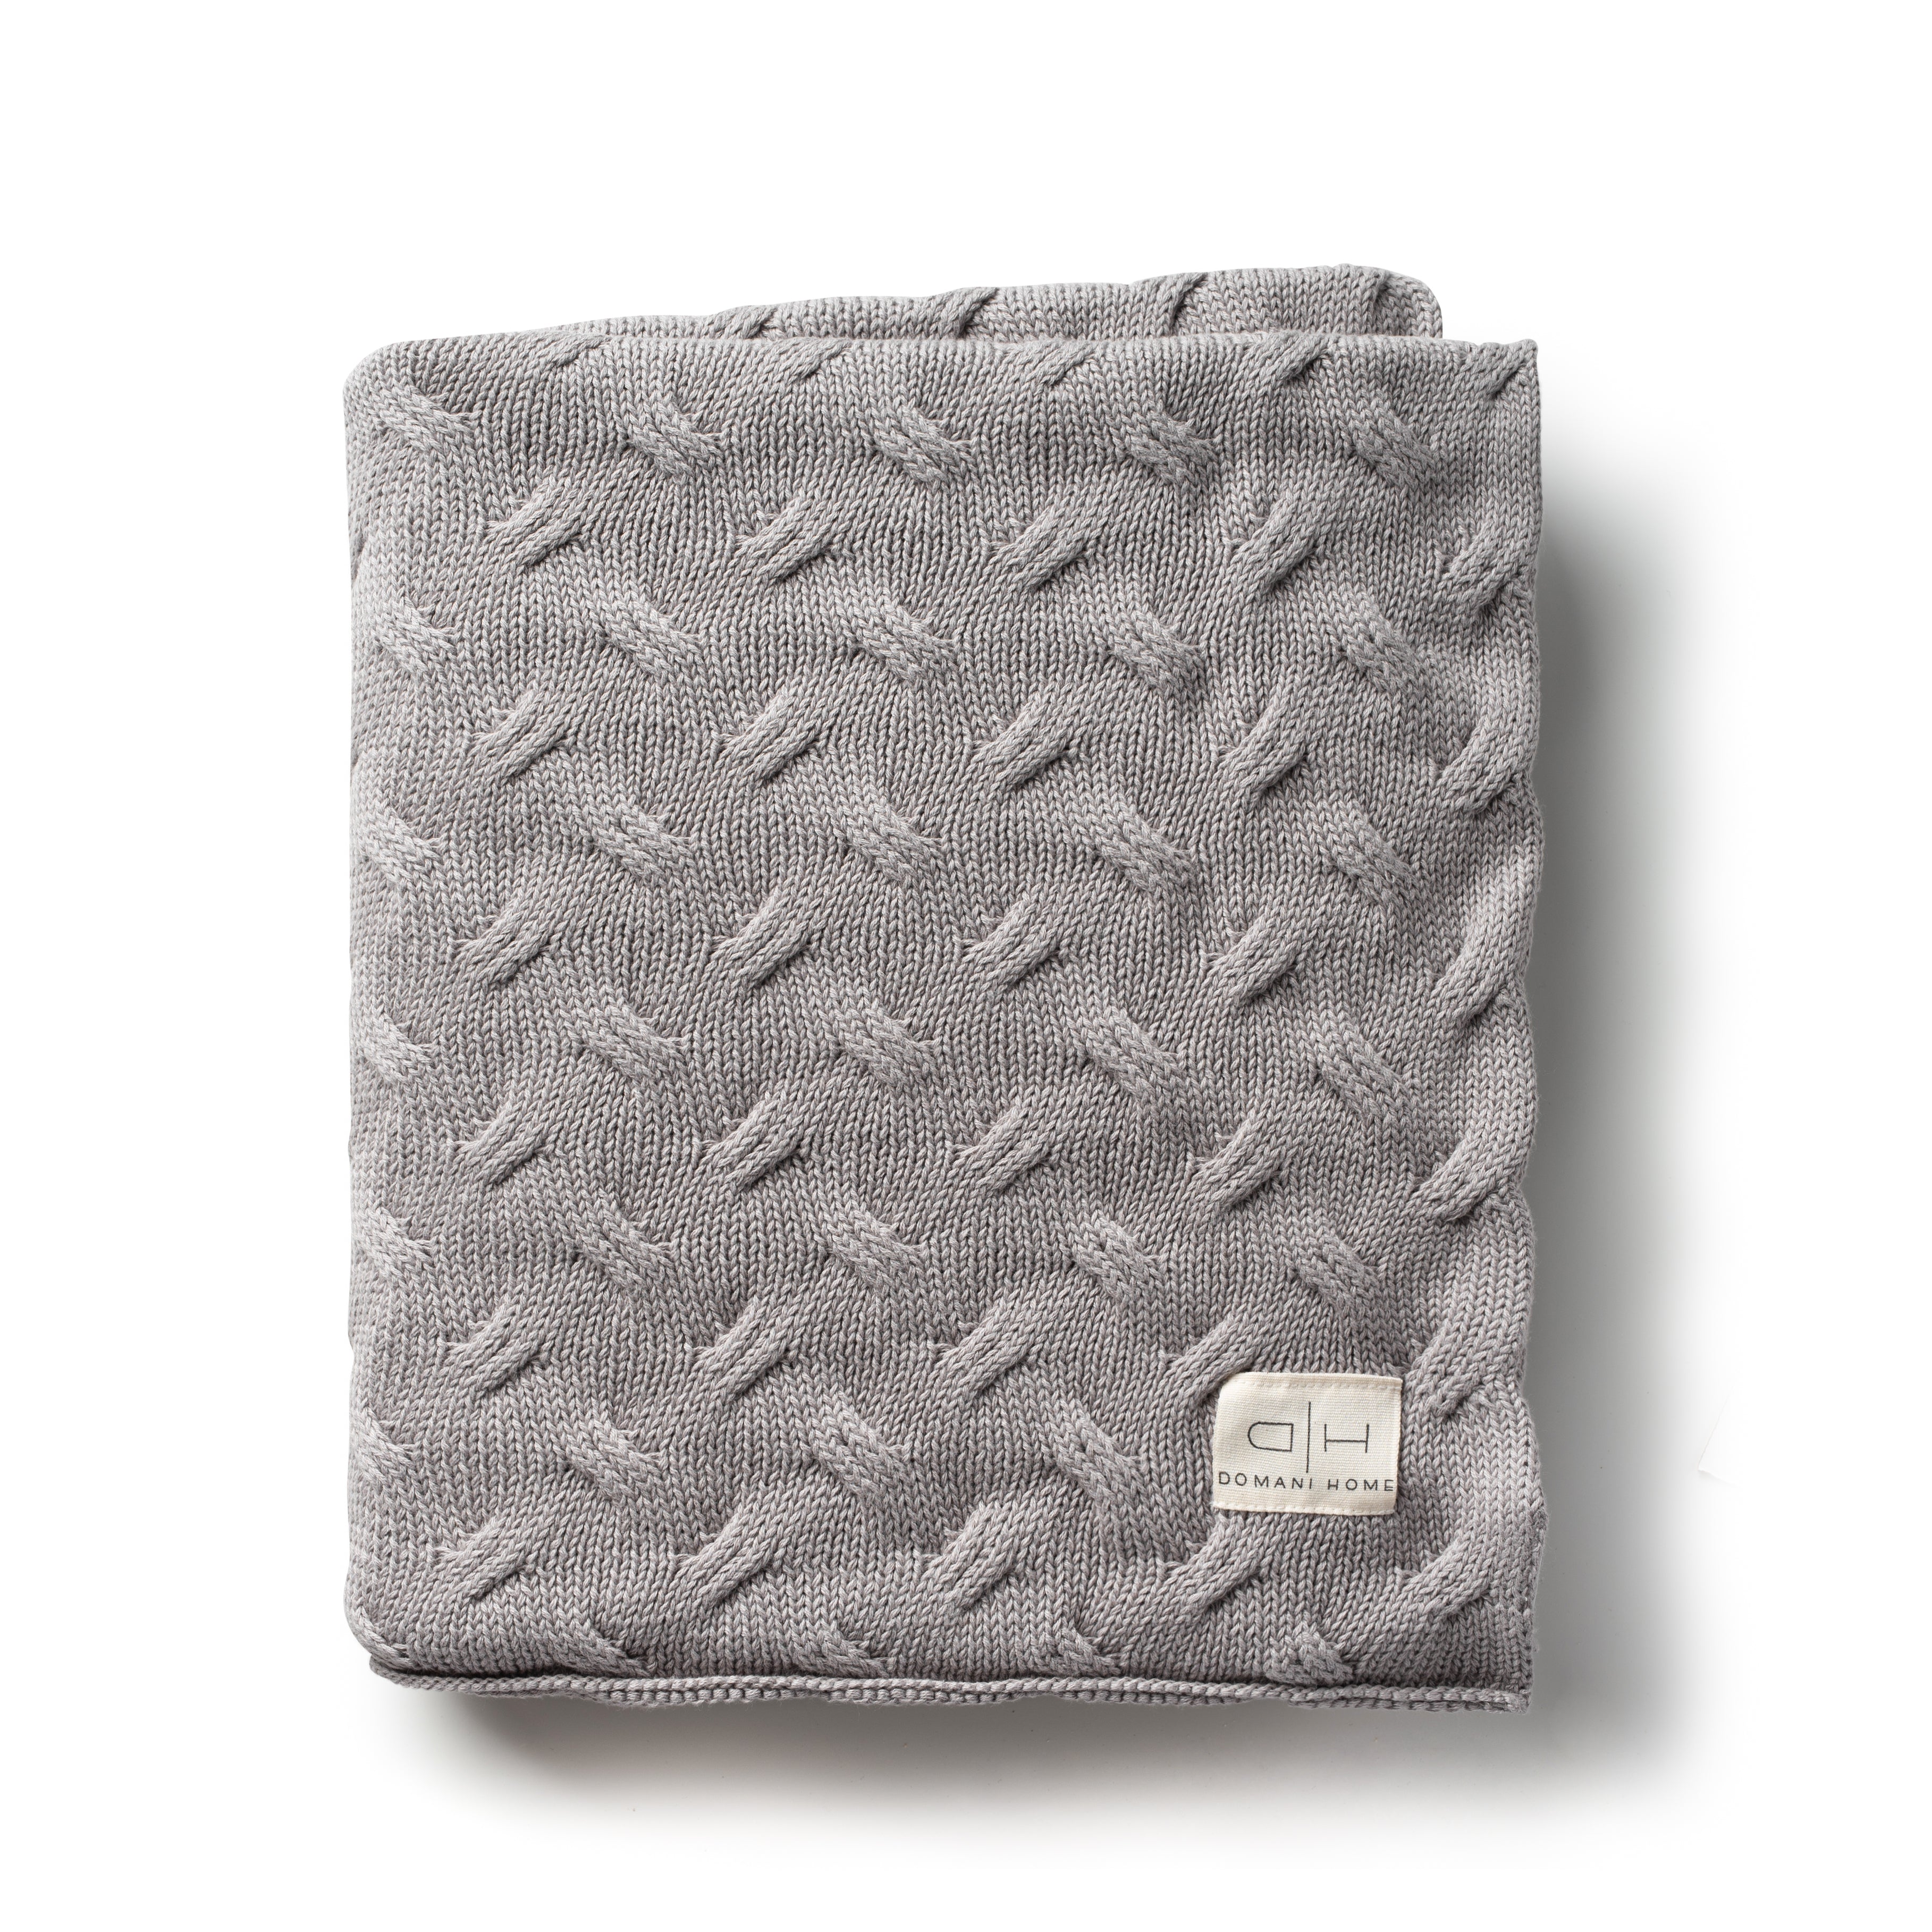 DH Waves Gray Throw